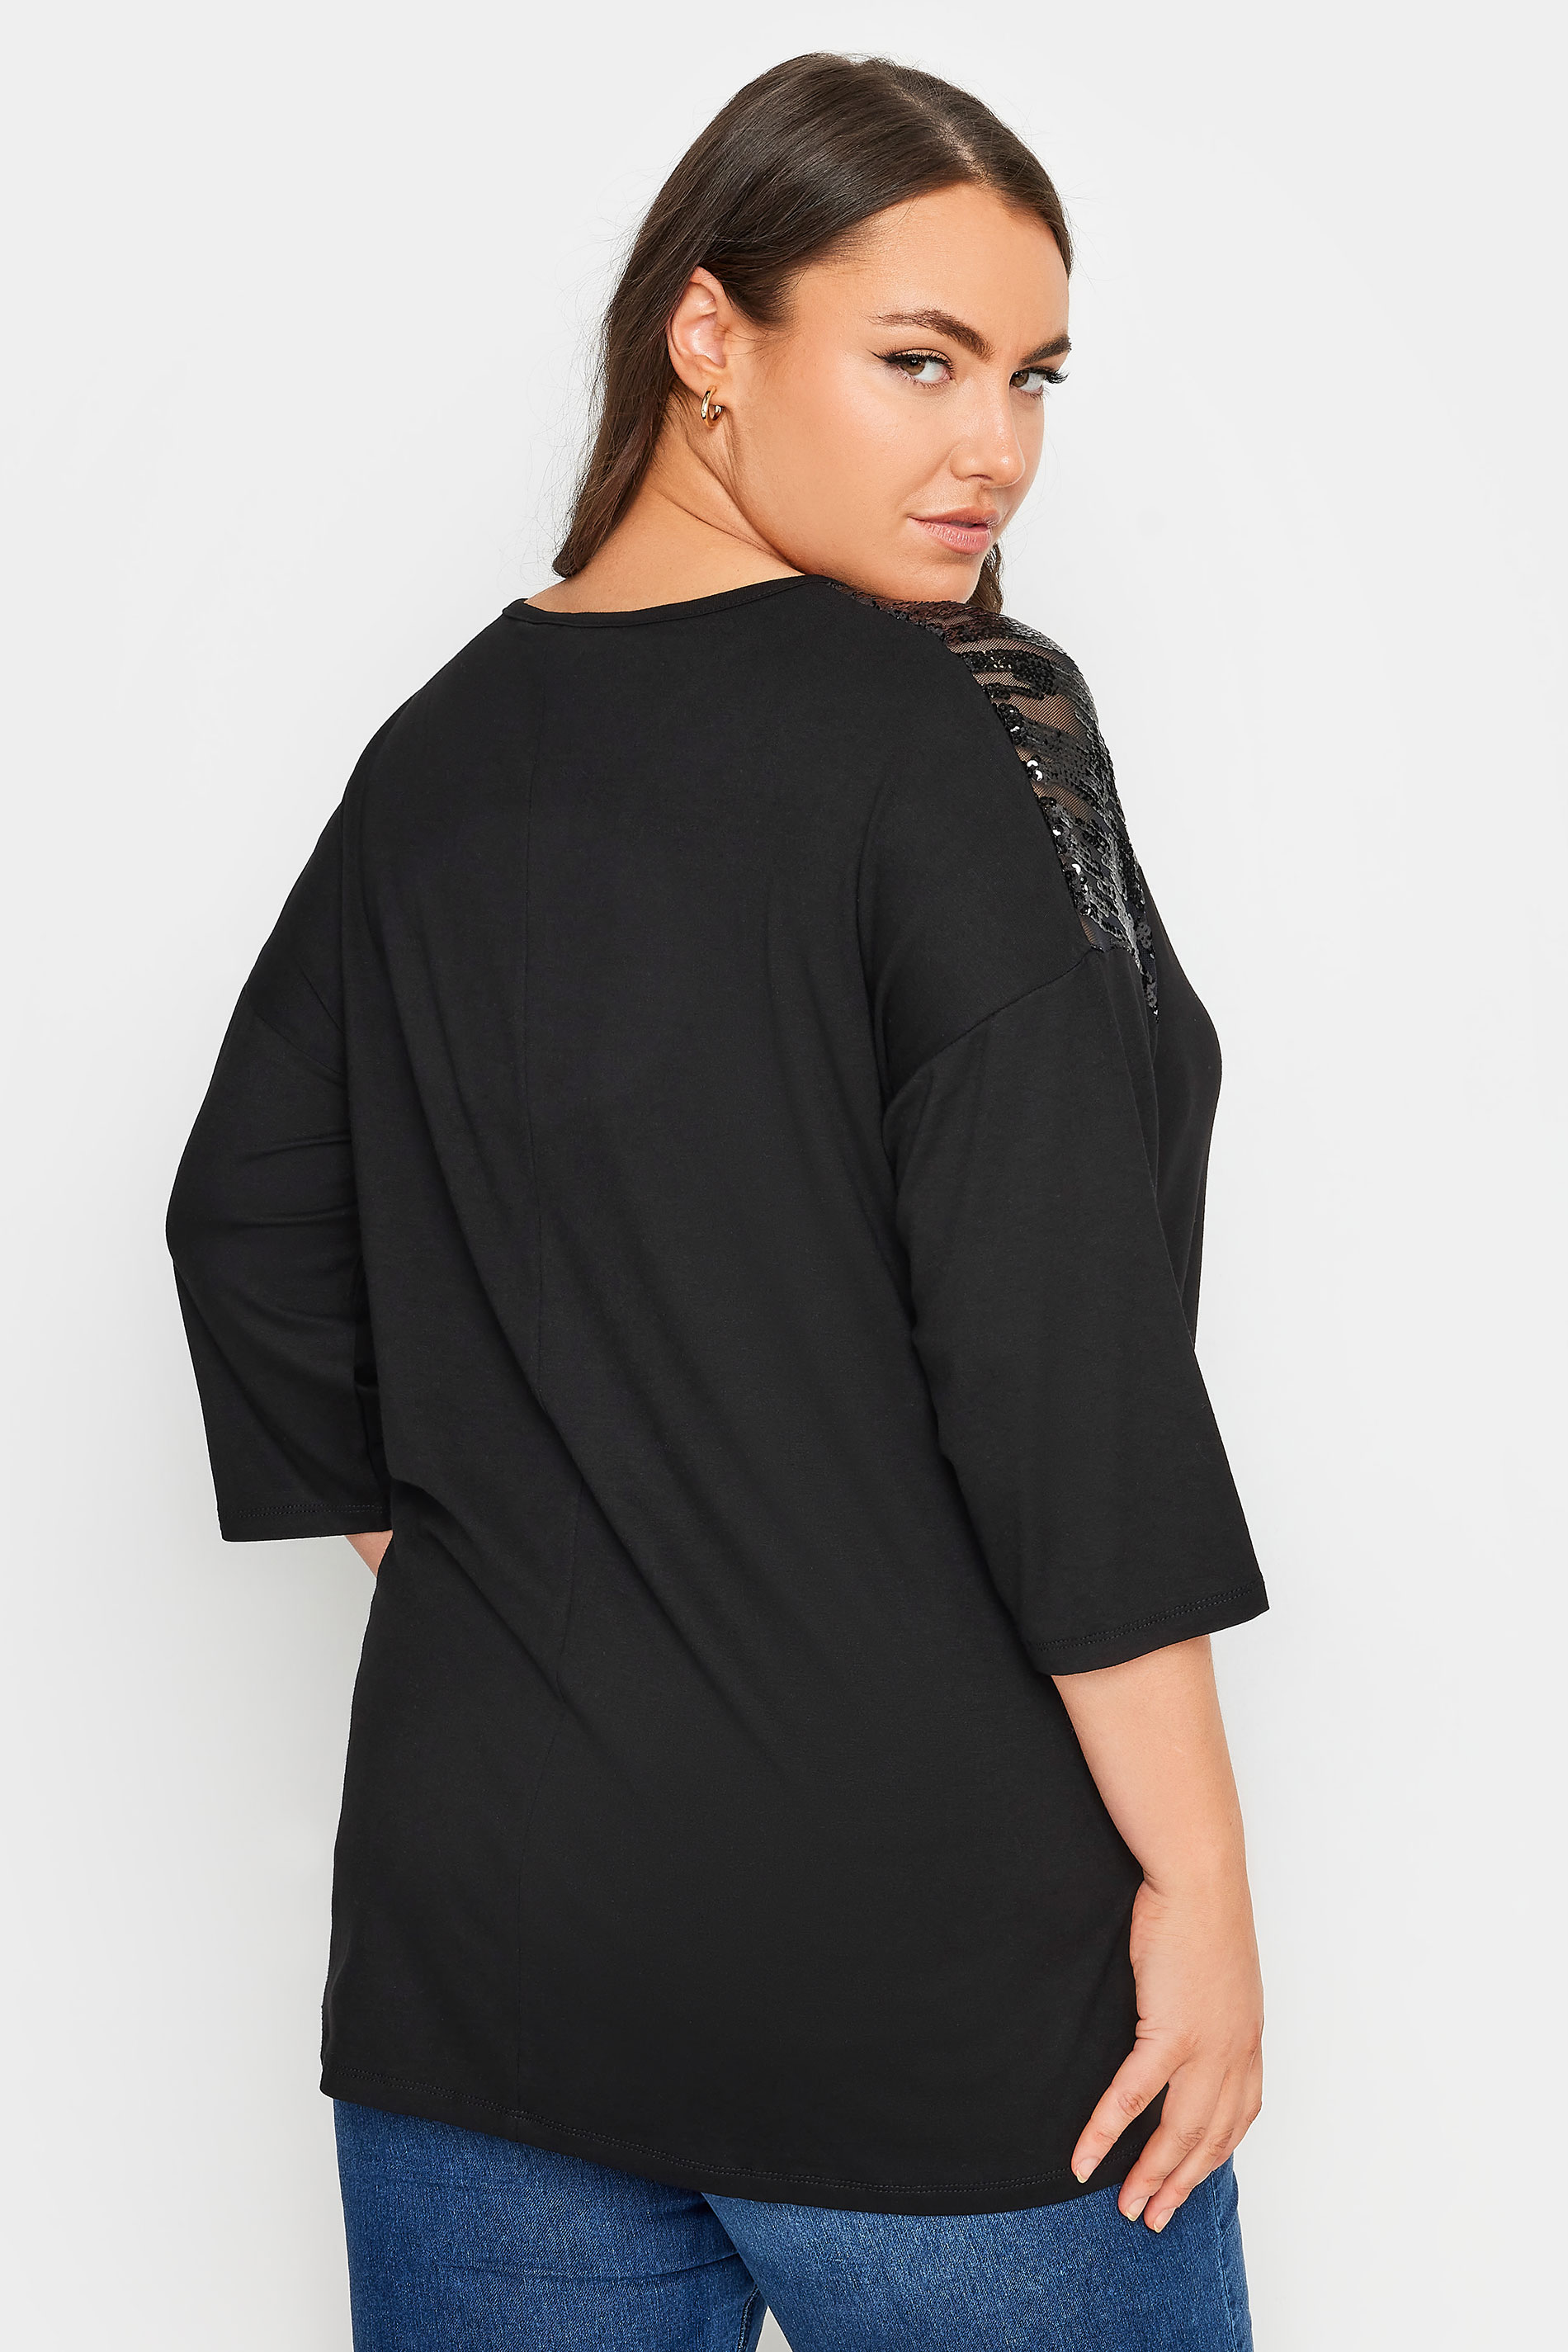 YOURS Plus Size Black Sequin Mesh Top | Yours Clothing 3